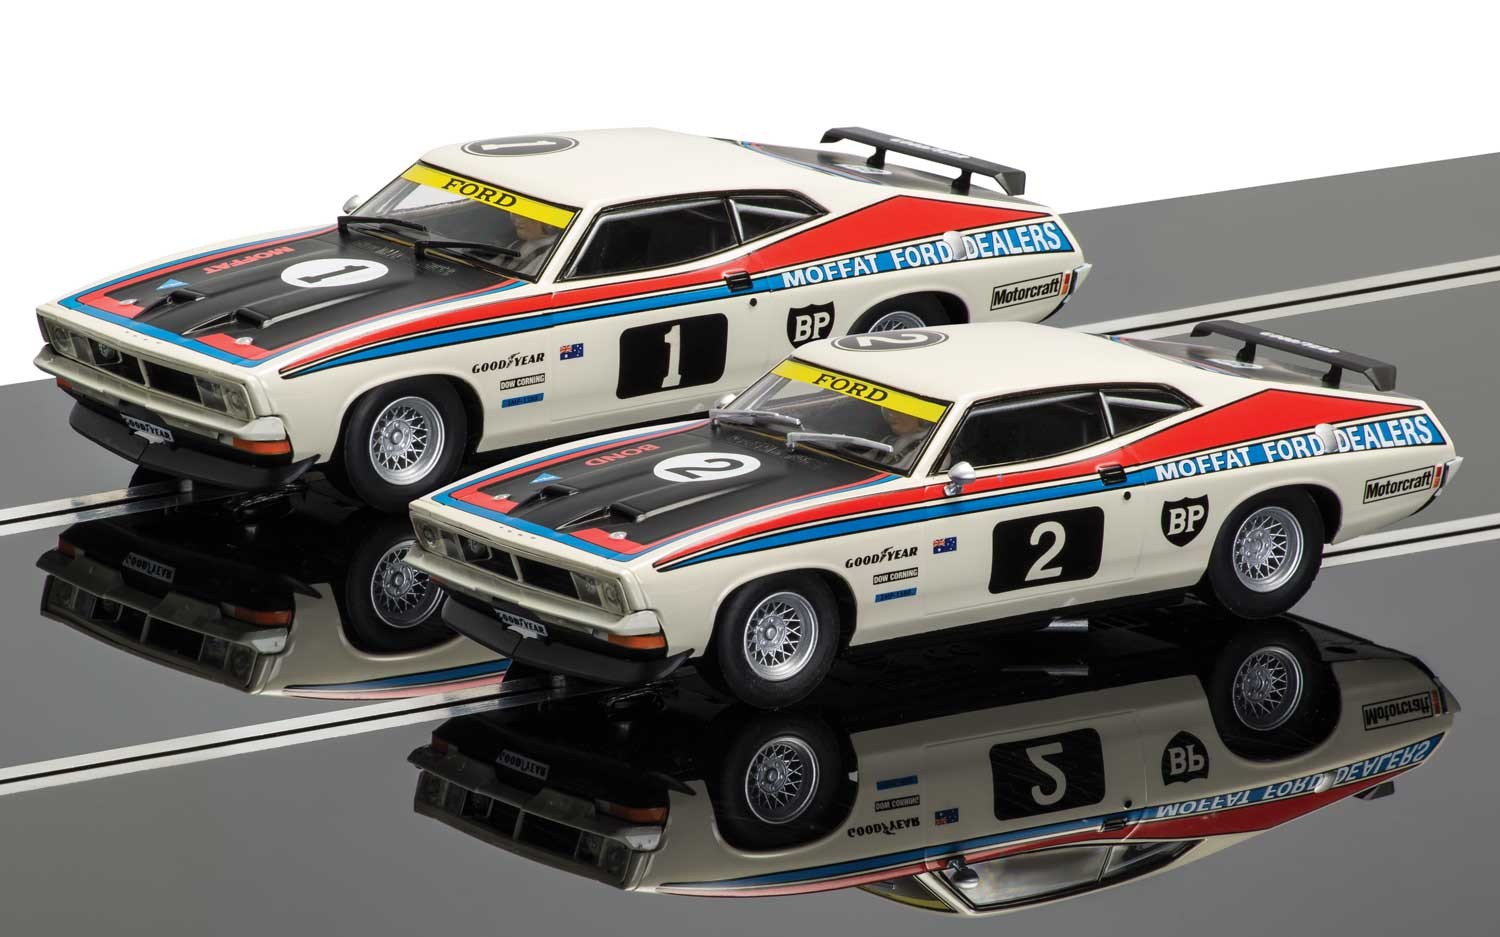 Scalextric "Moffat Ford" Ford XB Falcon LE Boxed Set 1/32 Slot Cars C3587A 